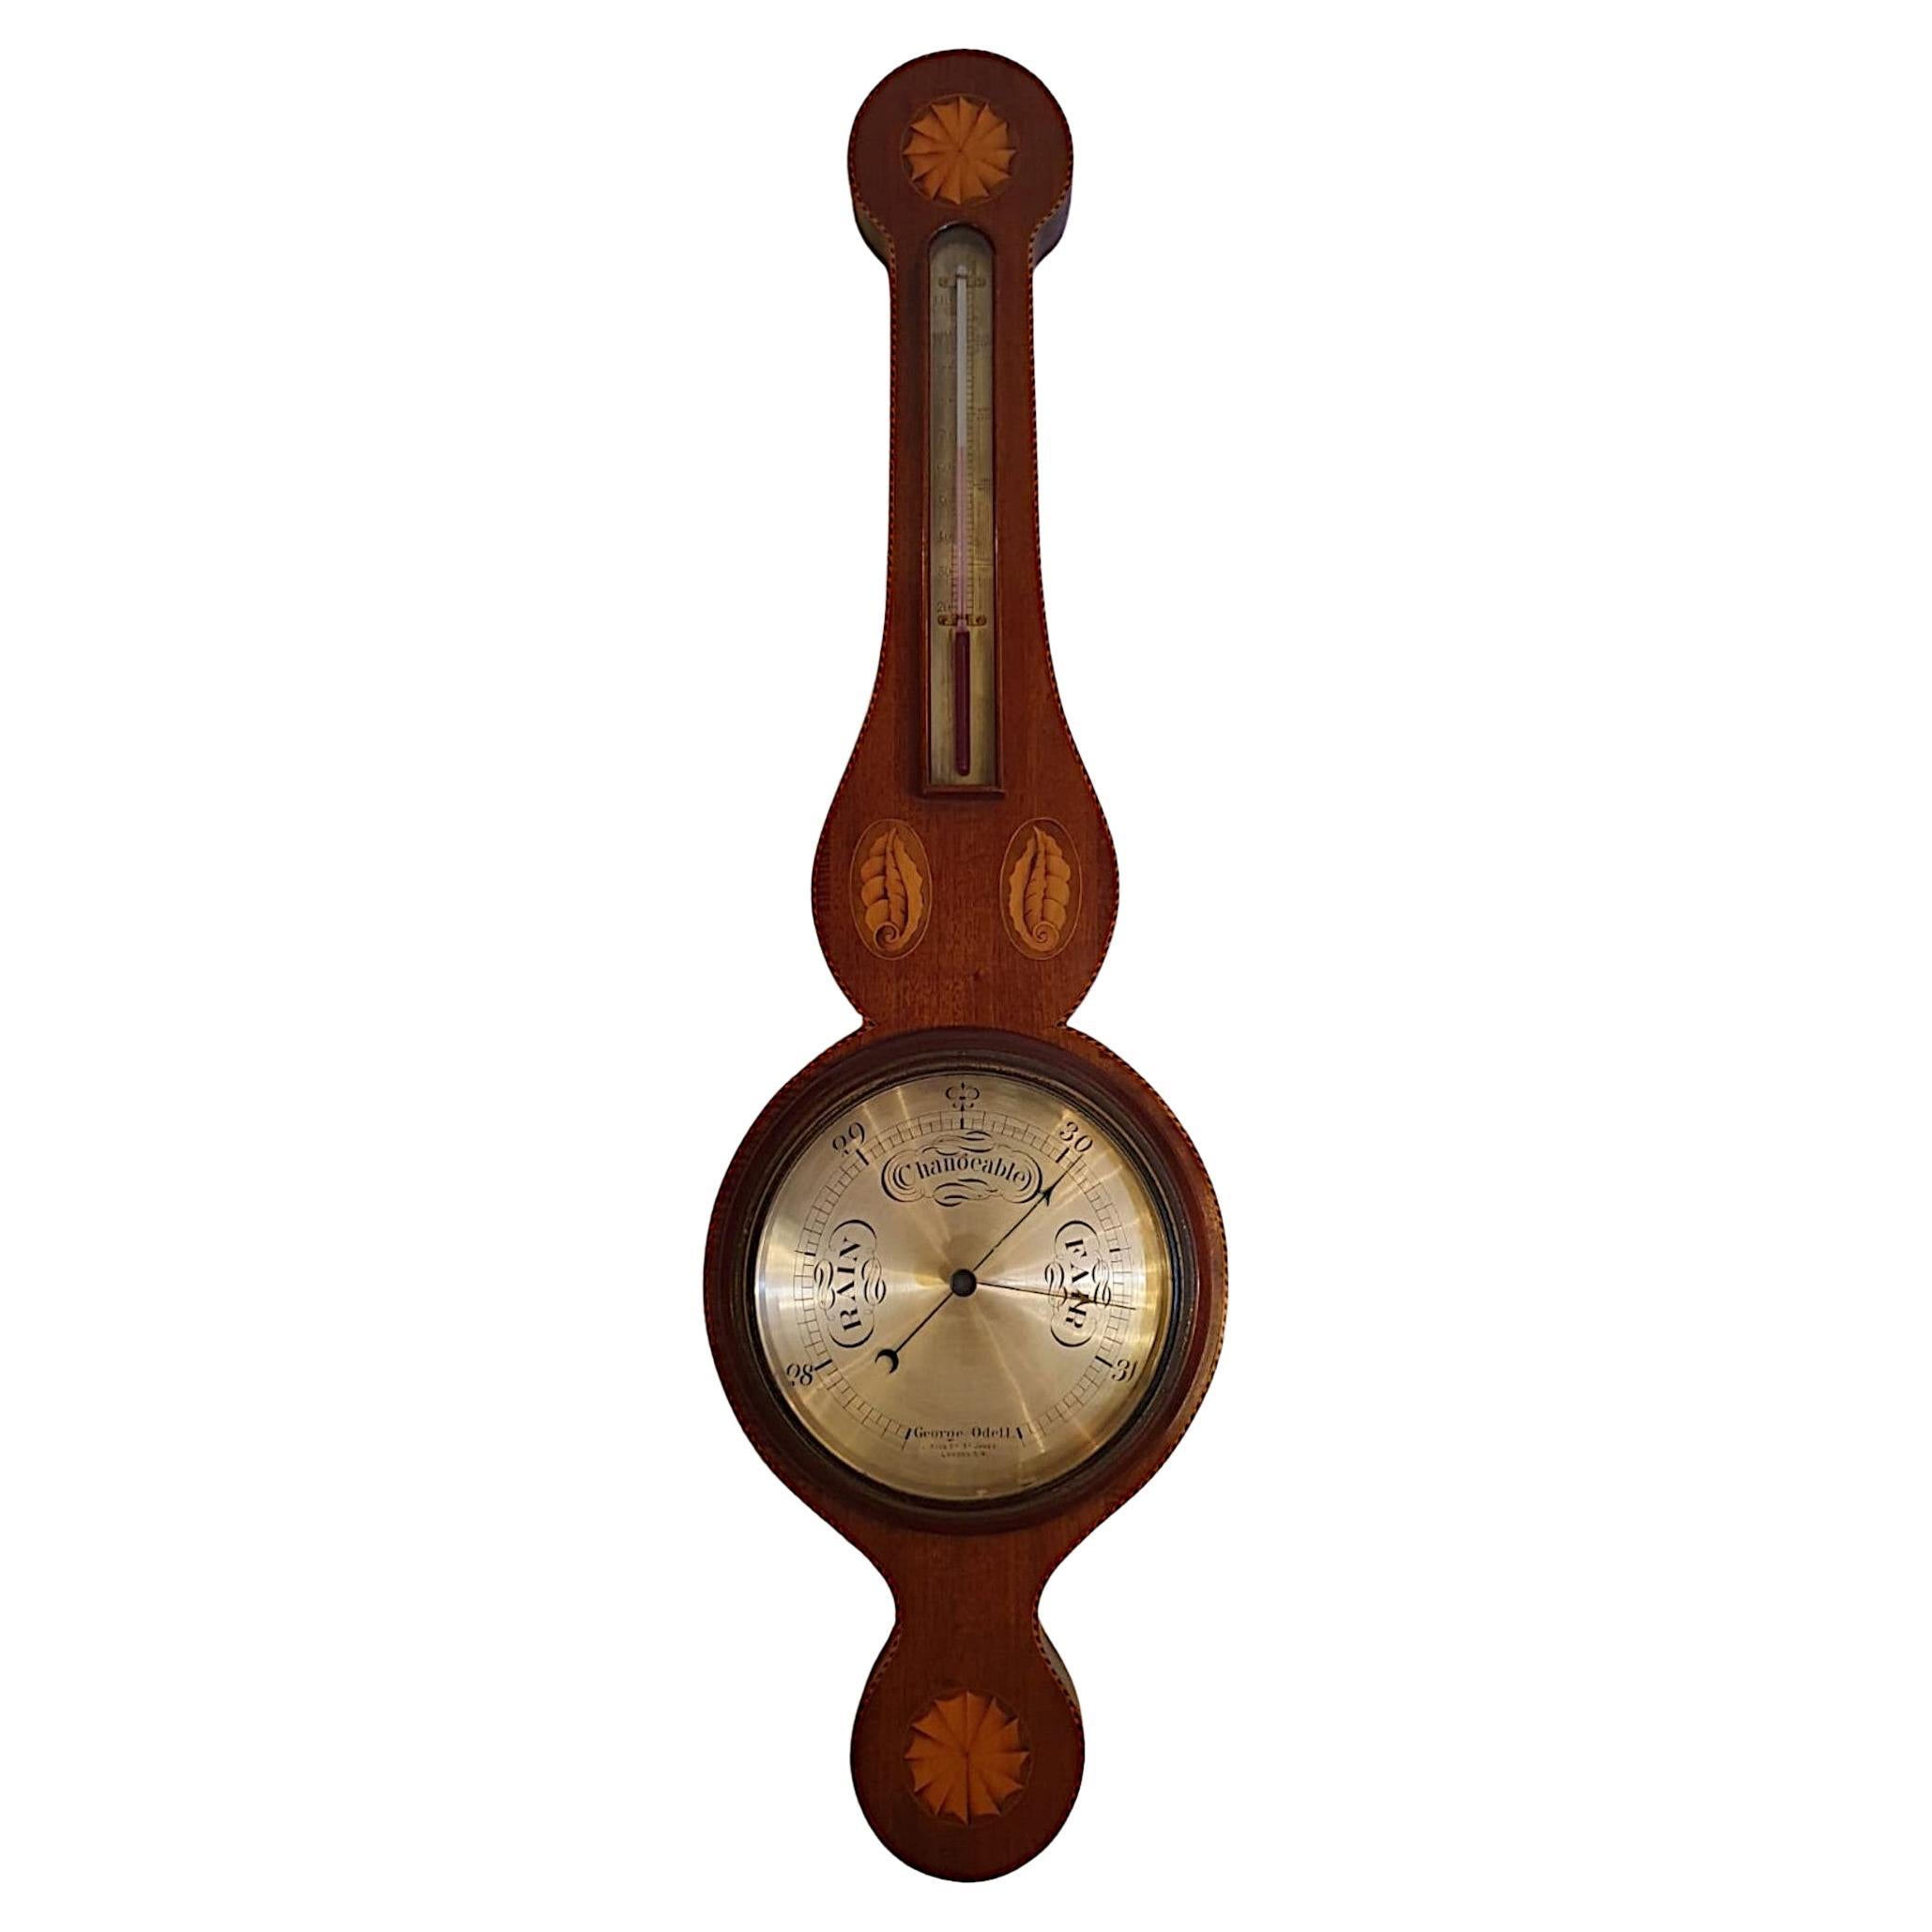 Gorgeous Edwardian Inlaid Barometer by George Odell